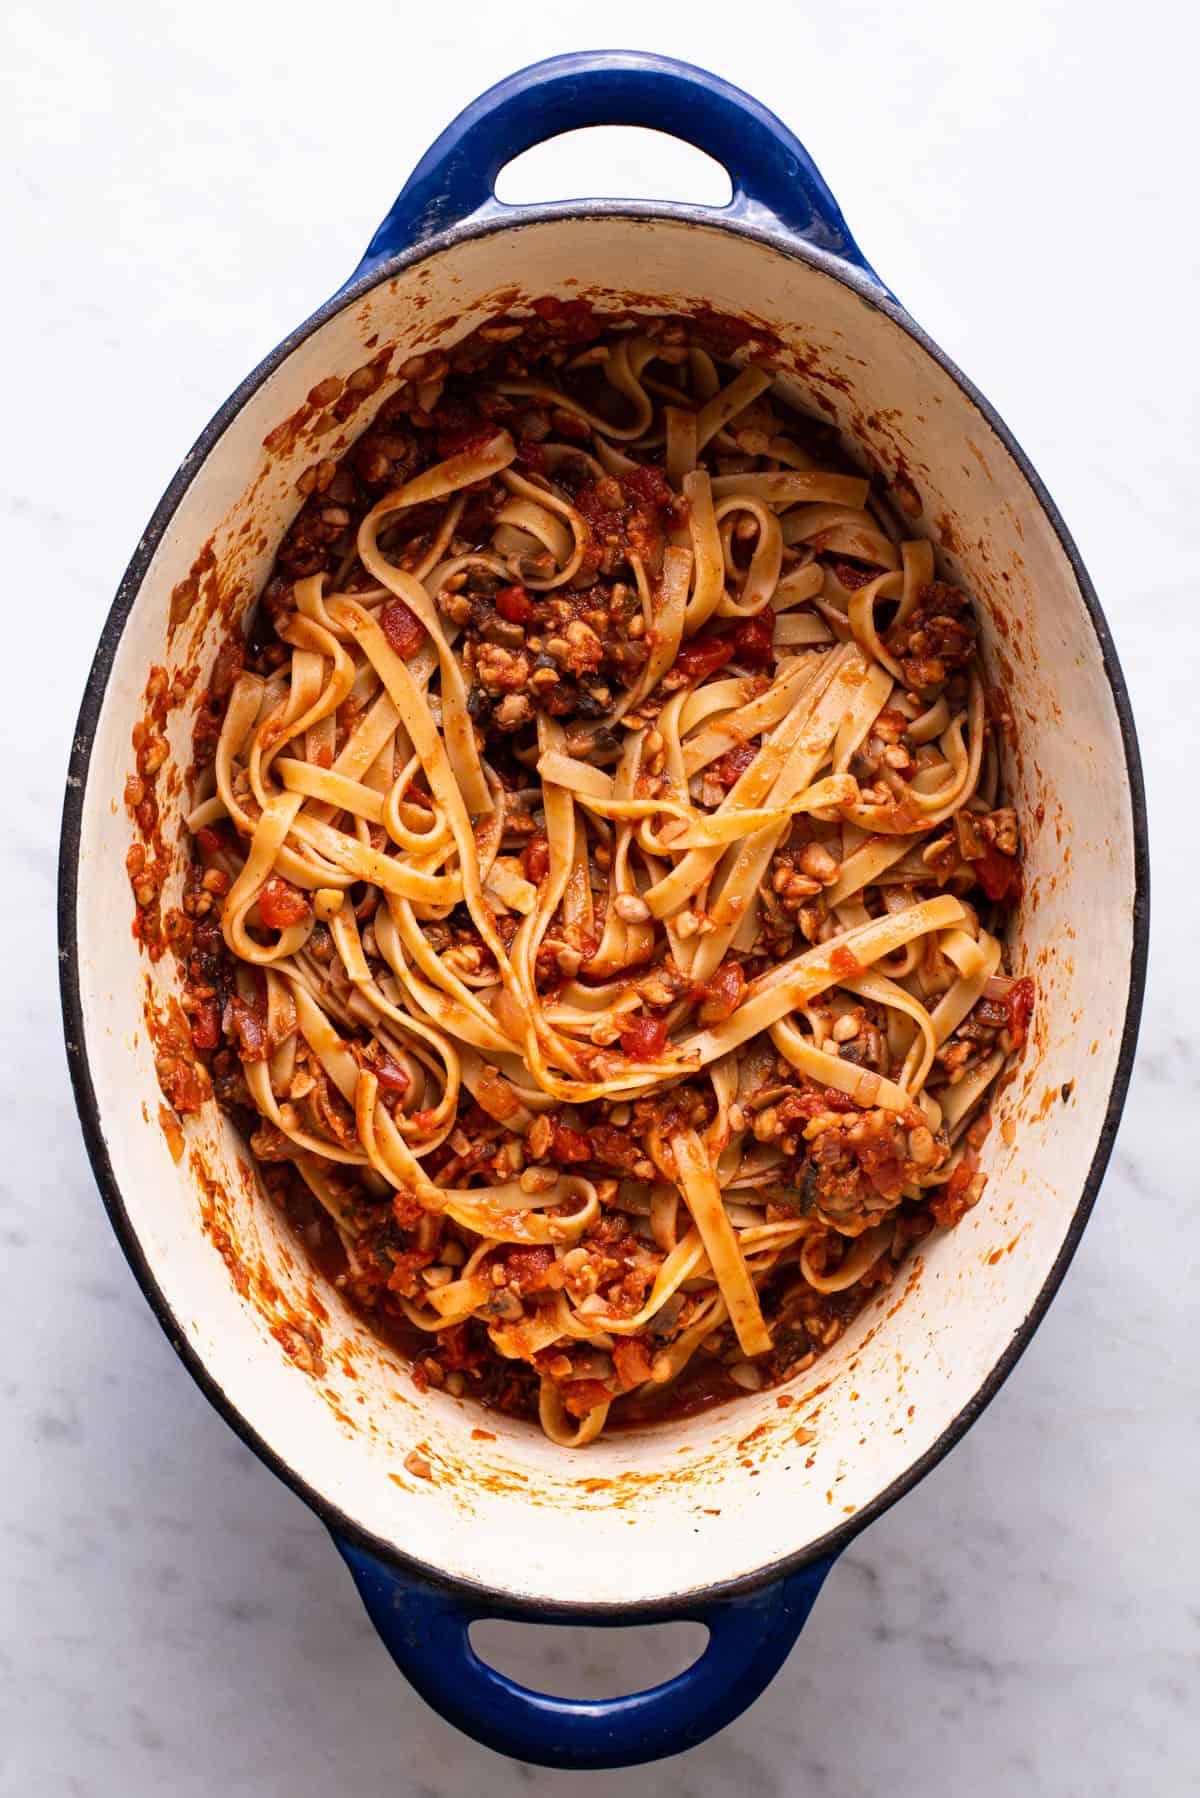 Fettuccine with vegan bolognese sauce in a blue Dutch oven.